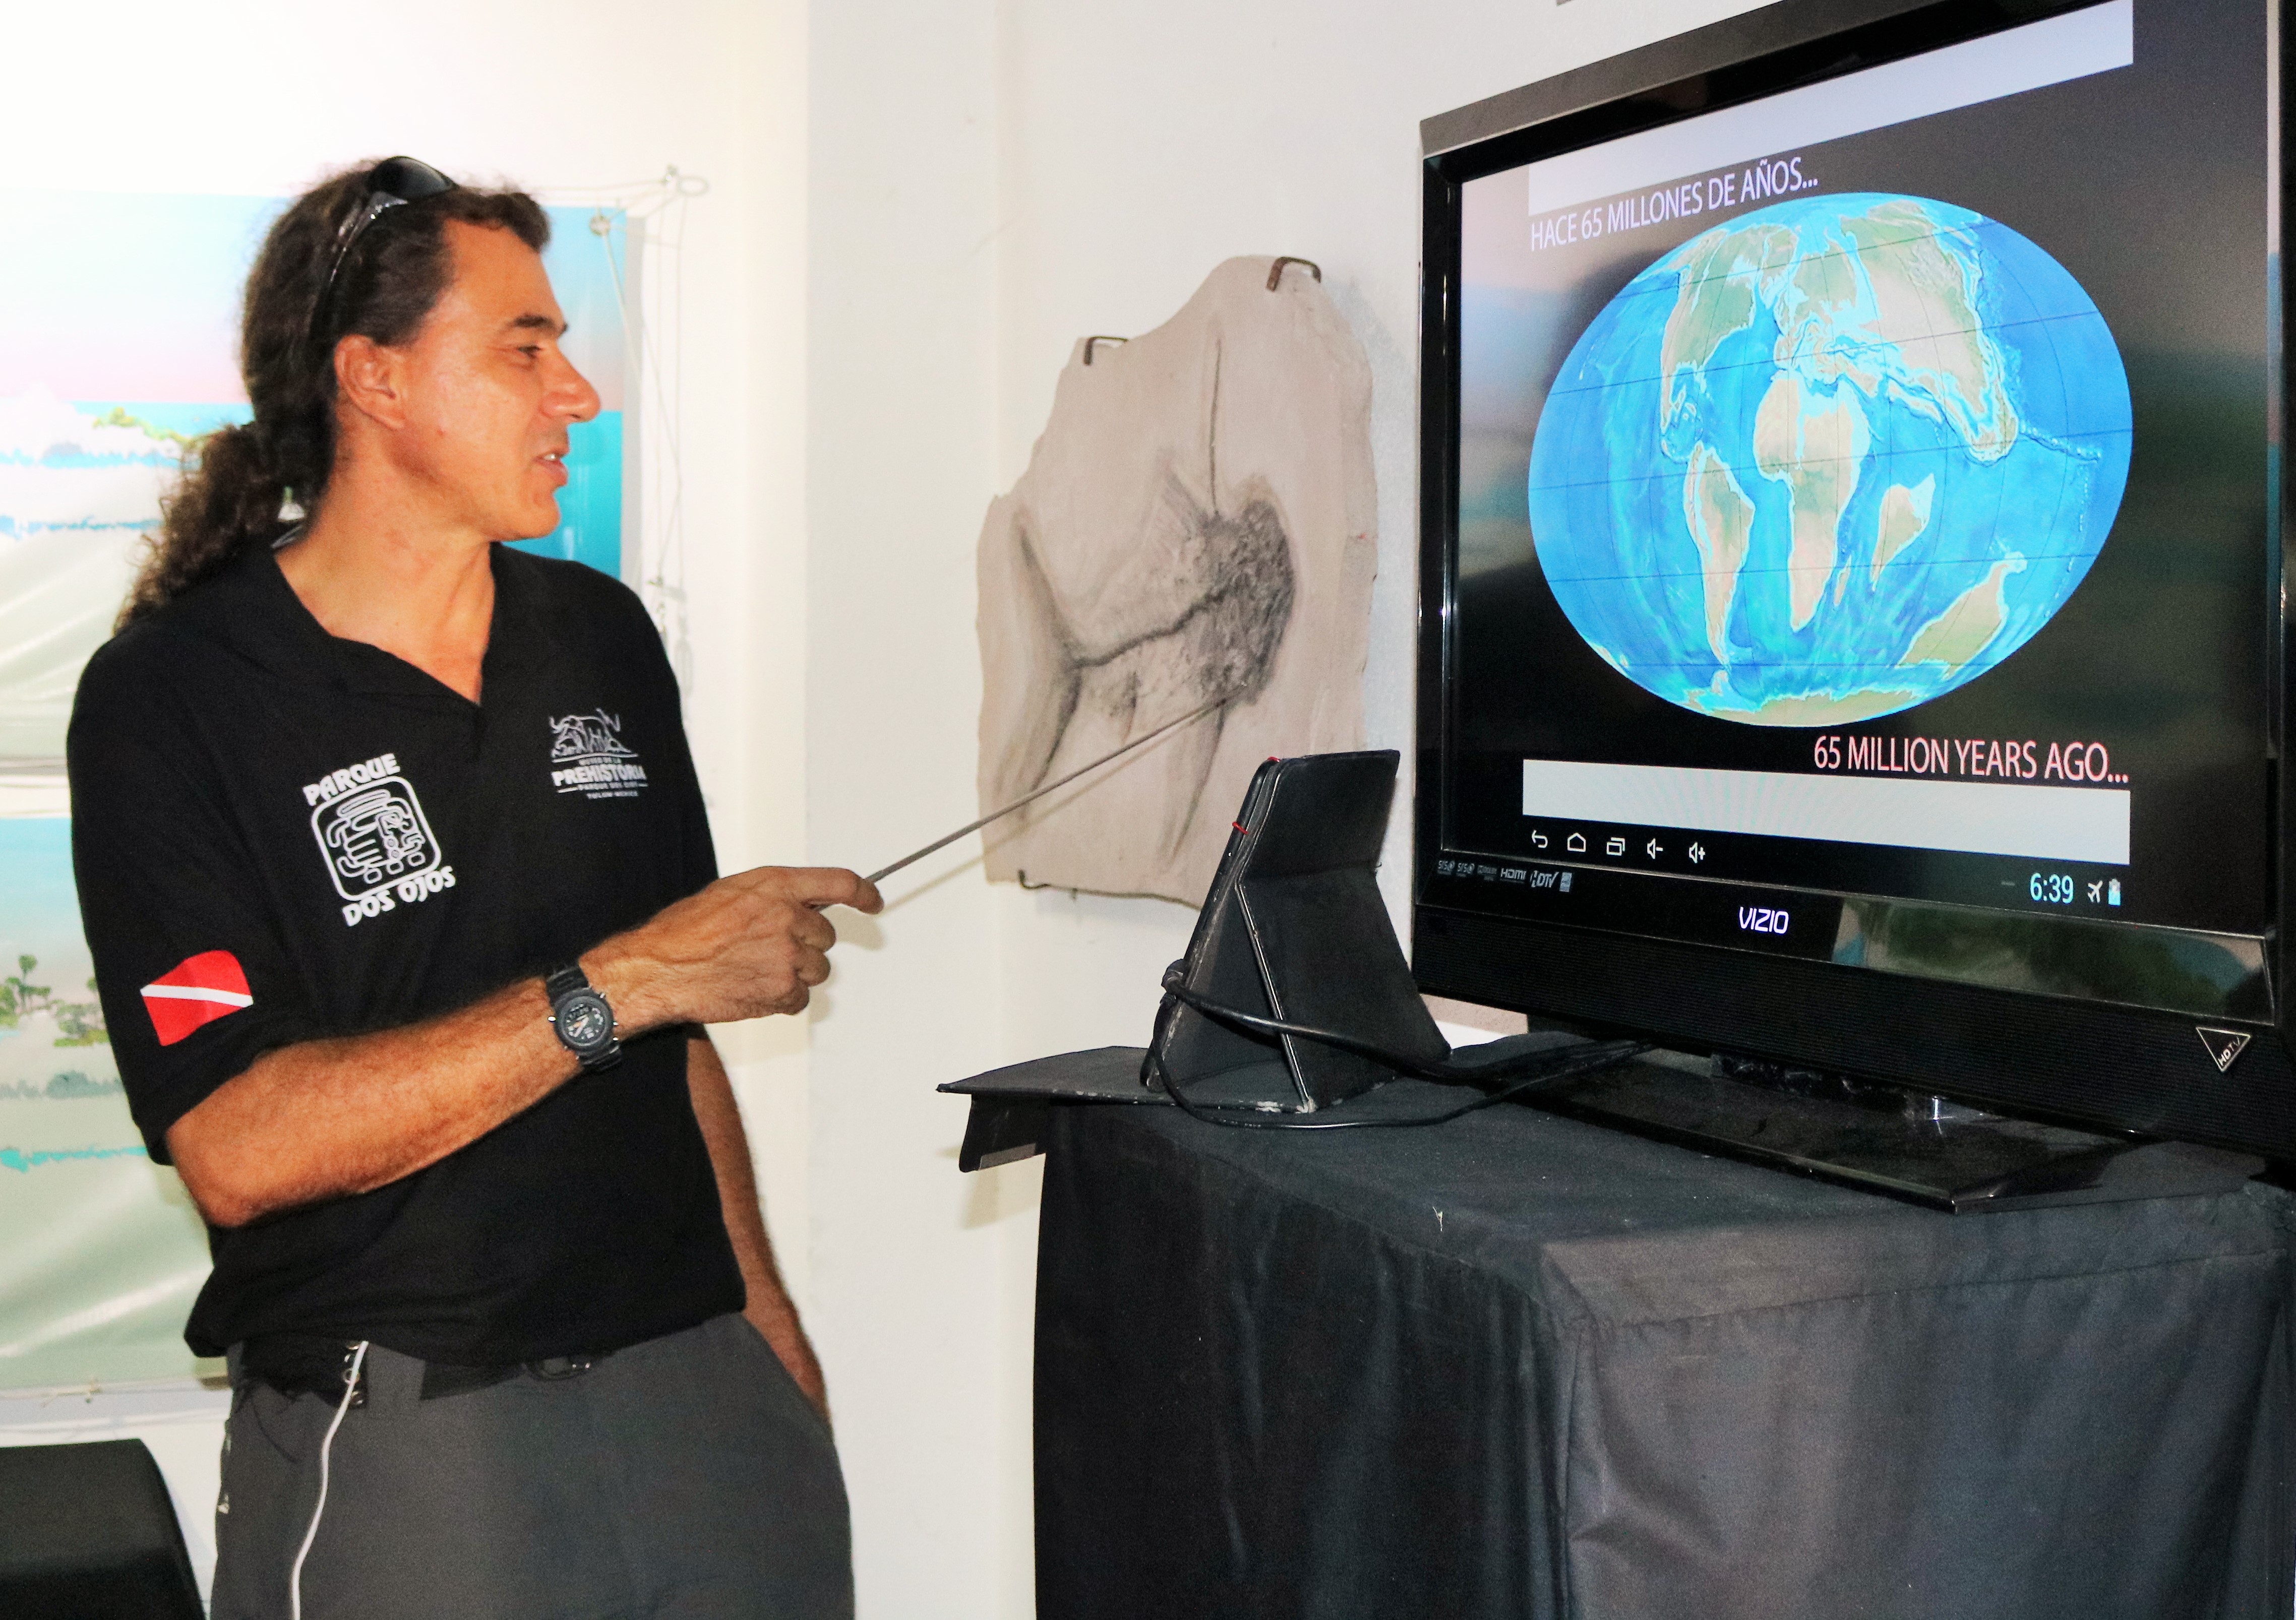 Visit to the palaeontology museum in Dos Ojos with a scientific presentation by Eugenio Aceves